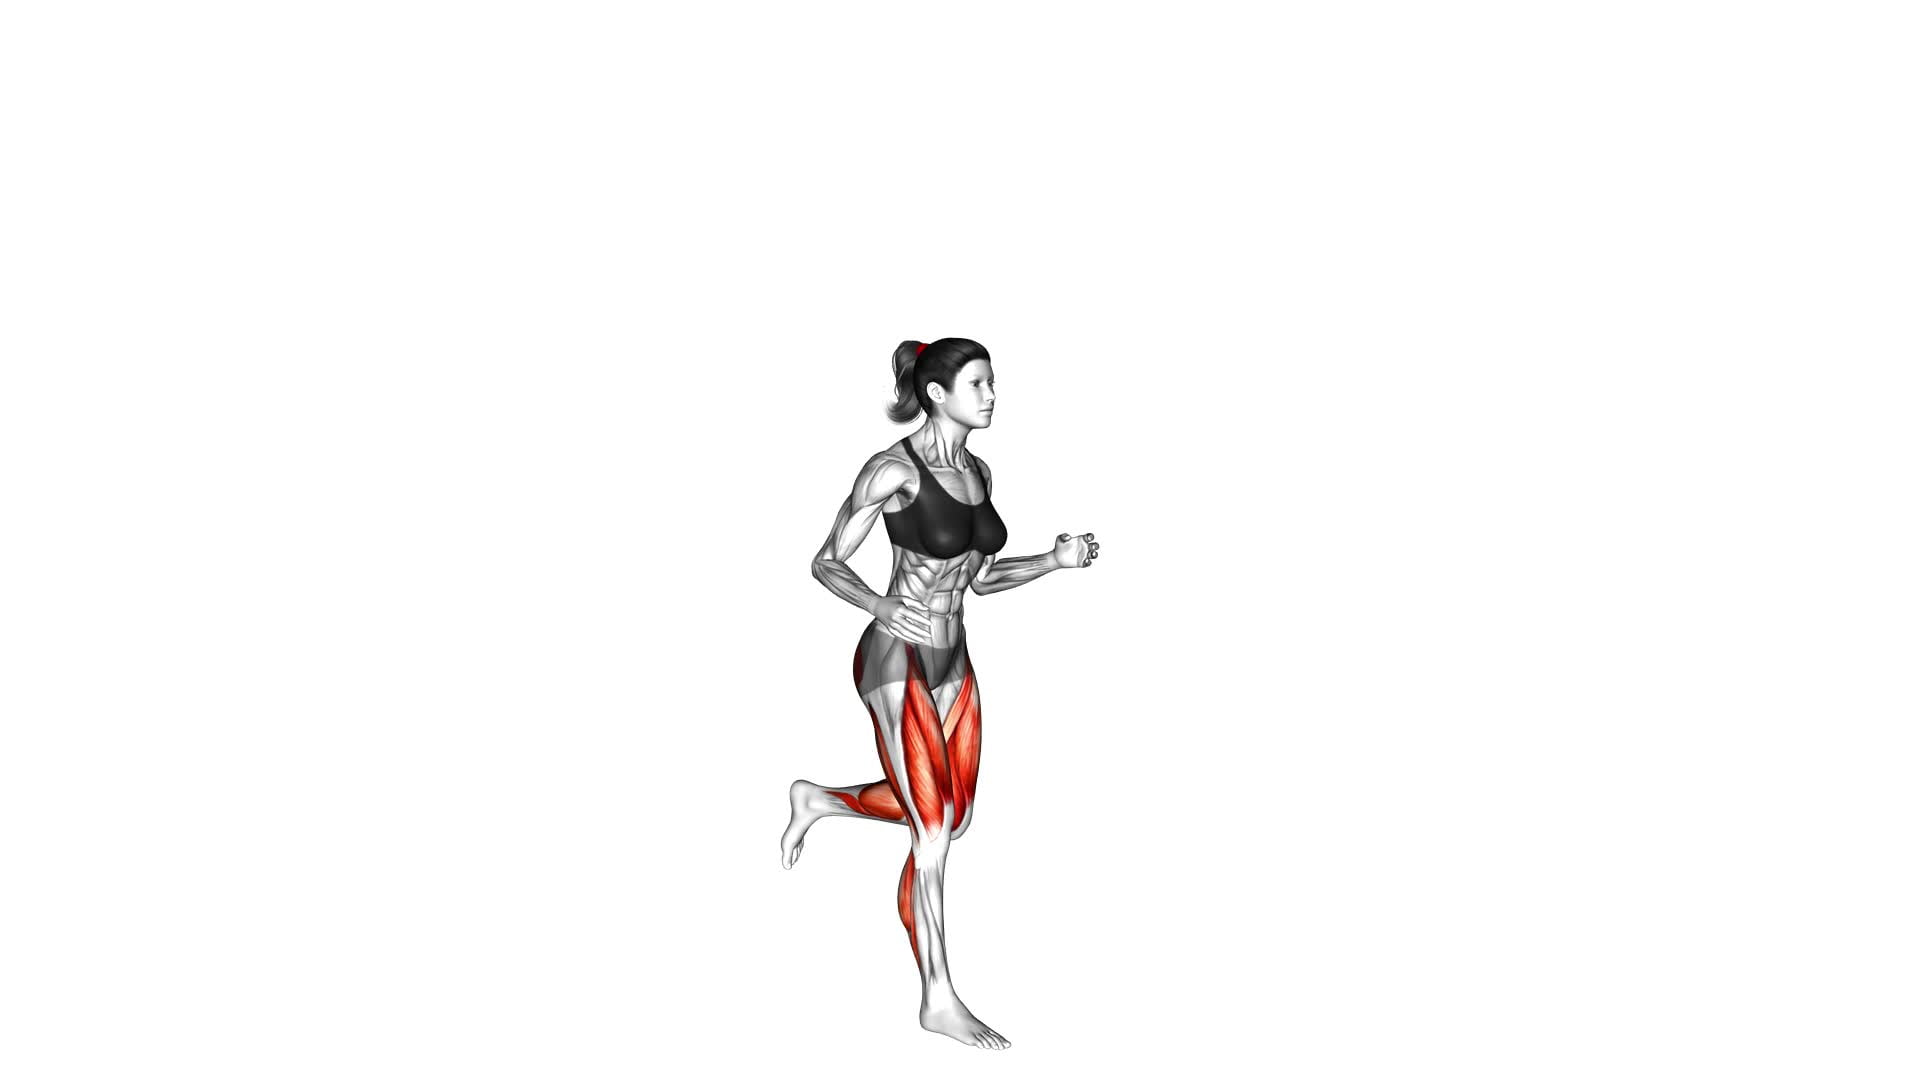 Run and Hop (female) - Video Exercise Guide & Tips